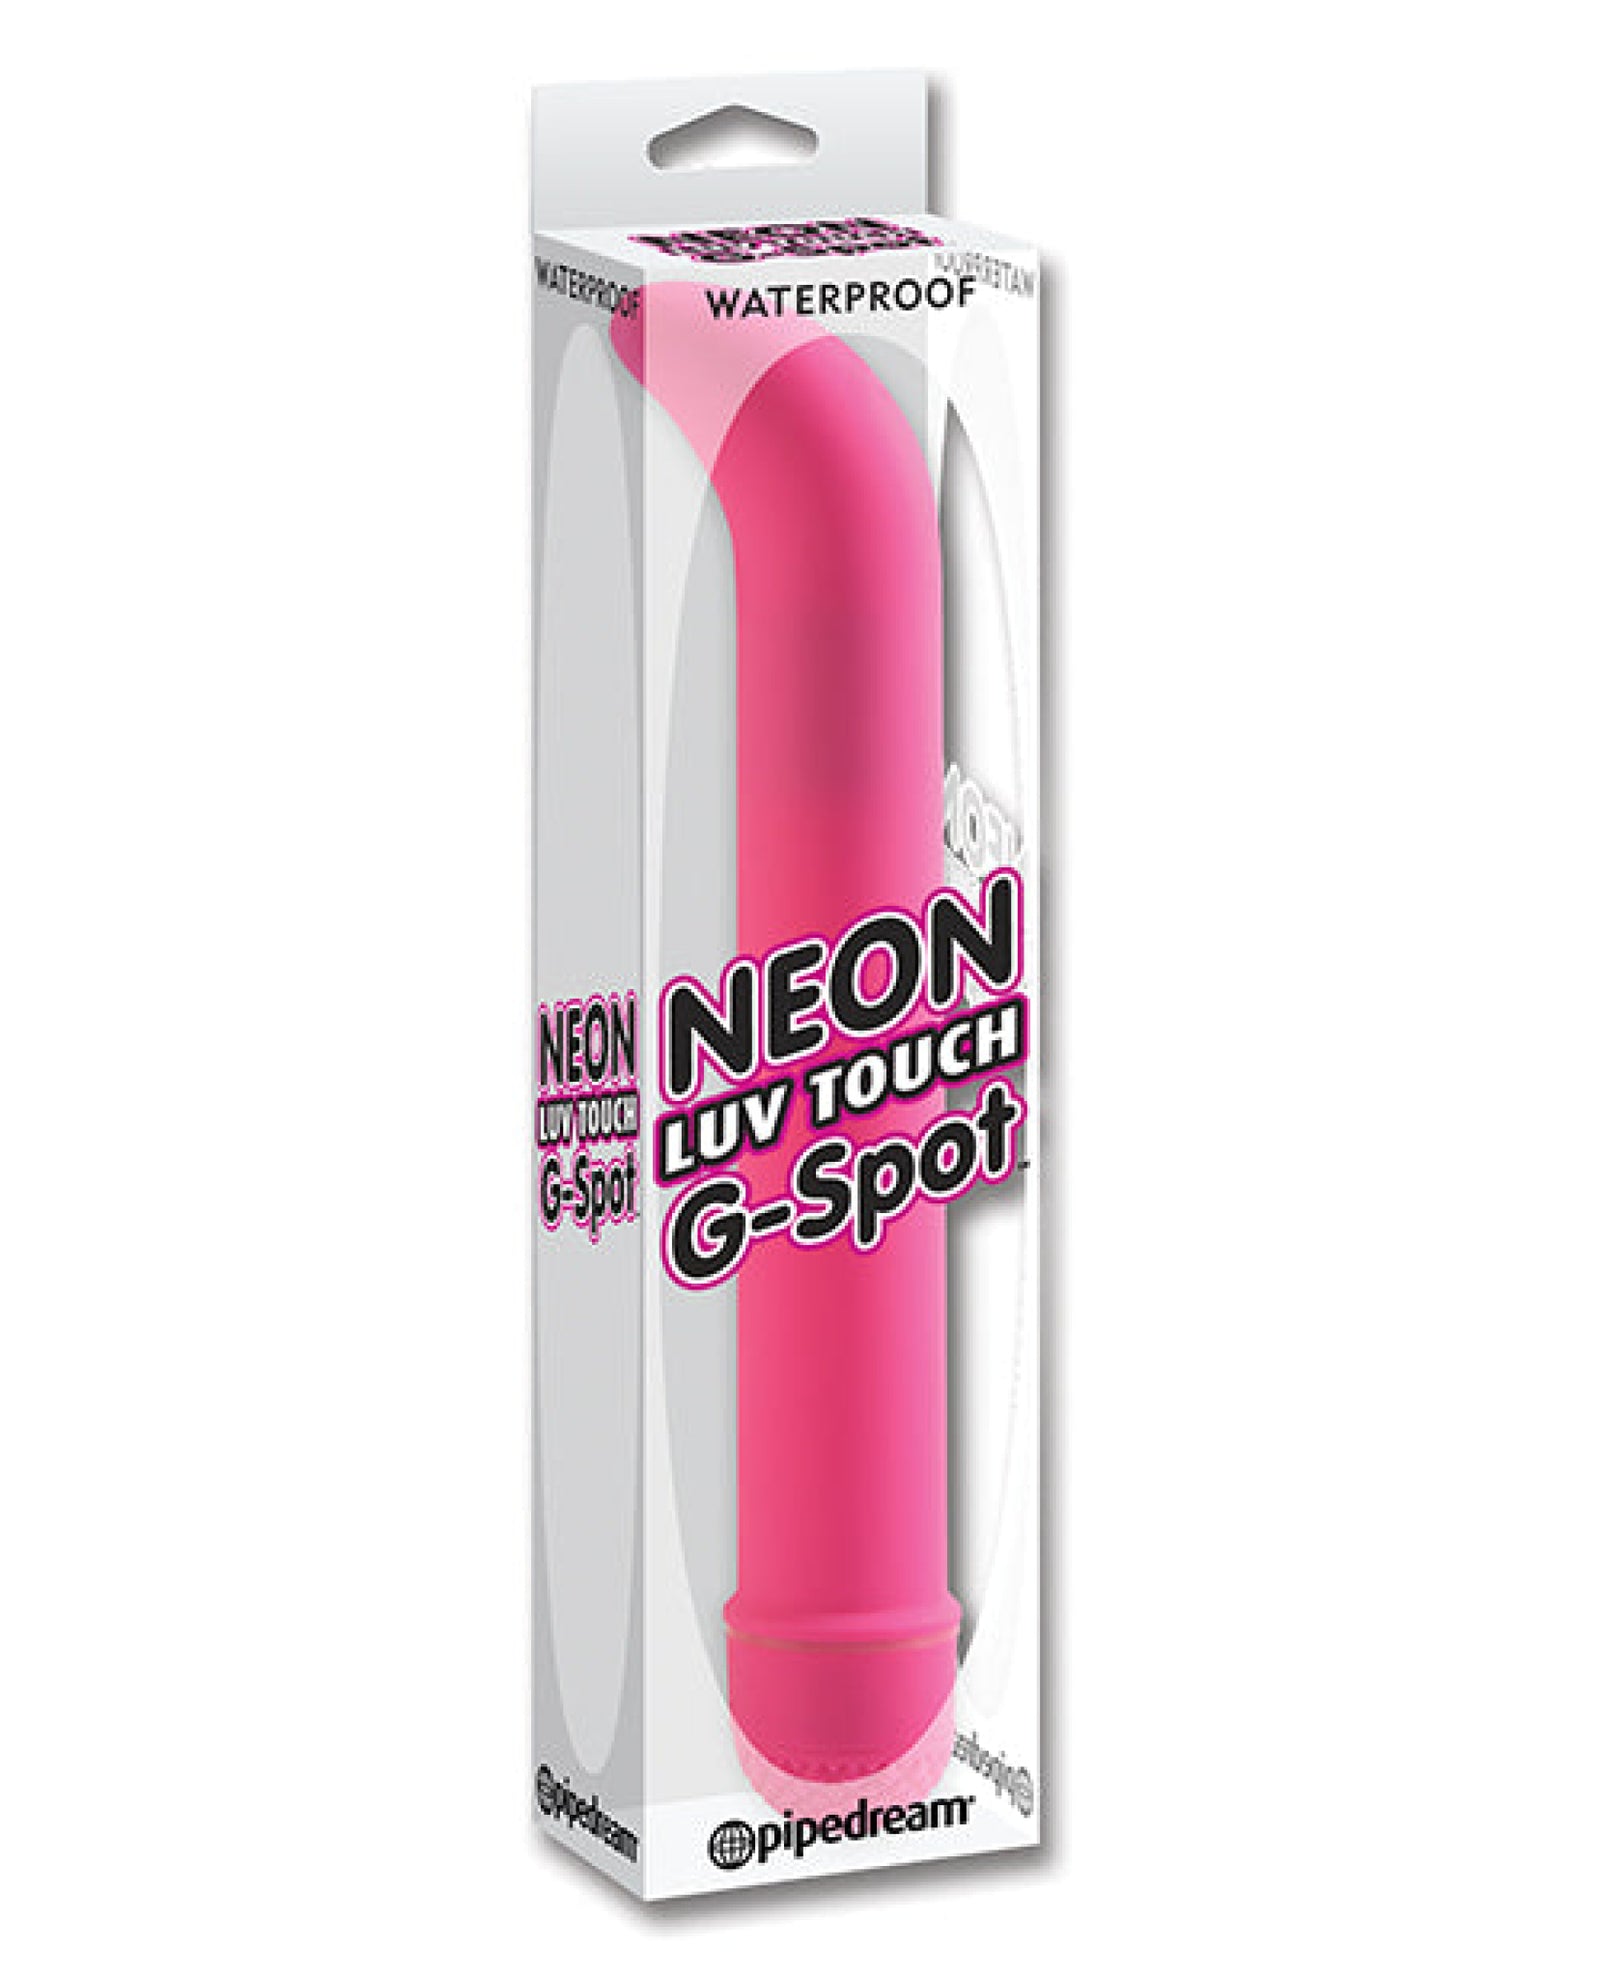 Neon Luv Touch G-spot - Pink Pipedream®